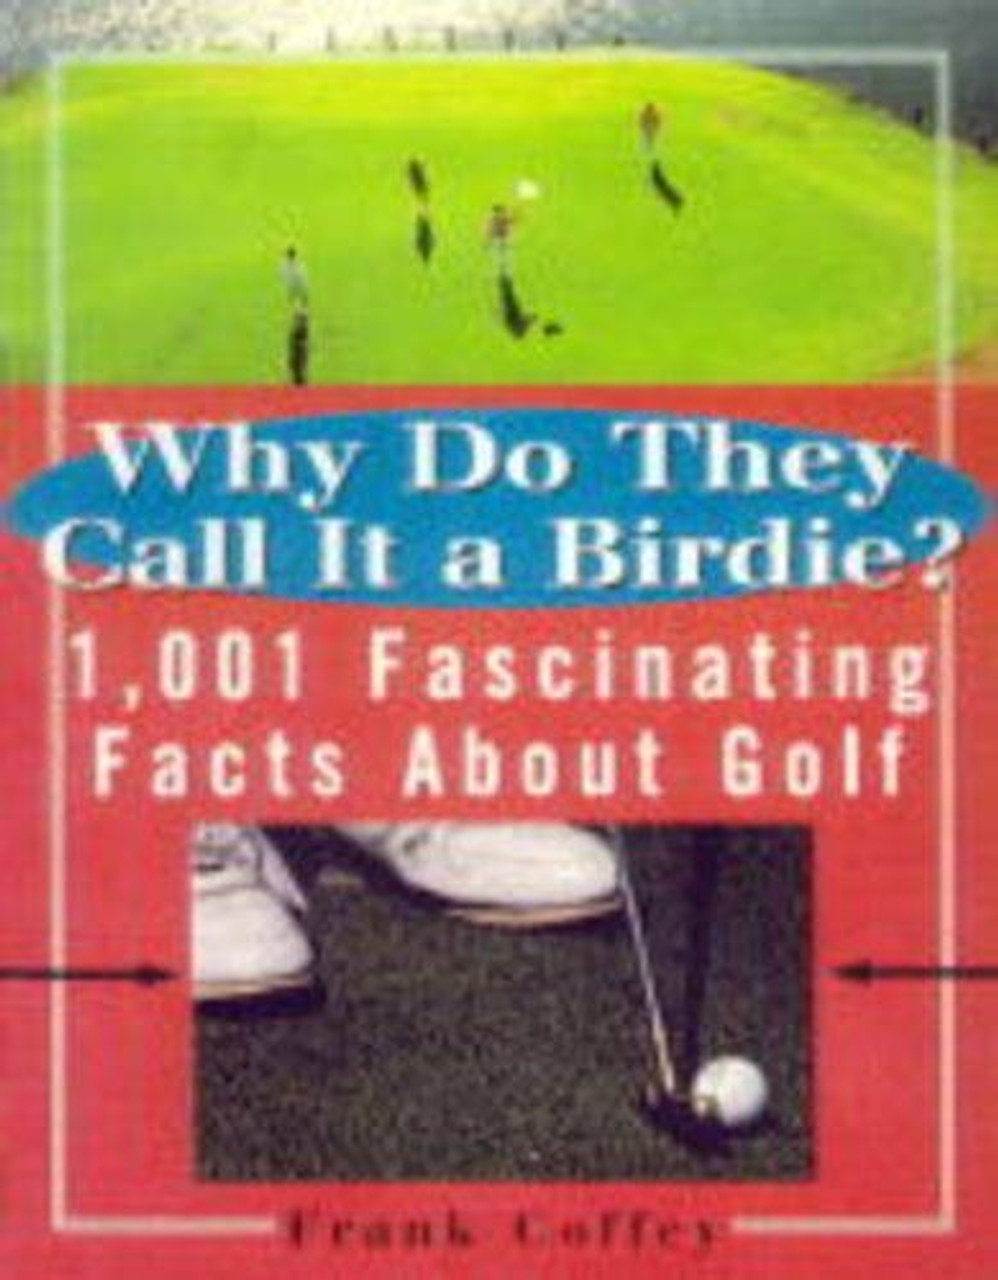 Frank Coffey / Why Do They Call it a Birdie? - 1001 Fascinating Facts About Golf (Hardback)